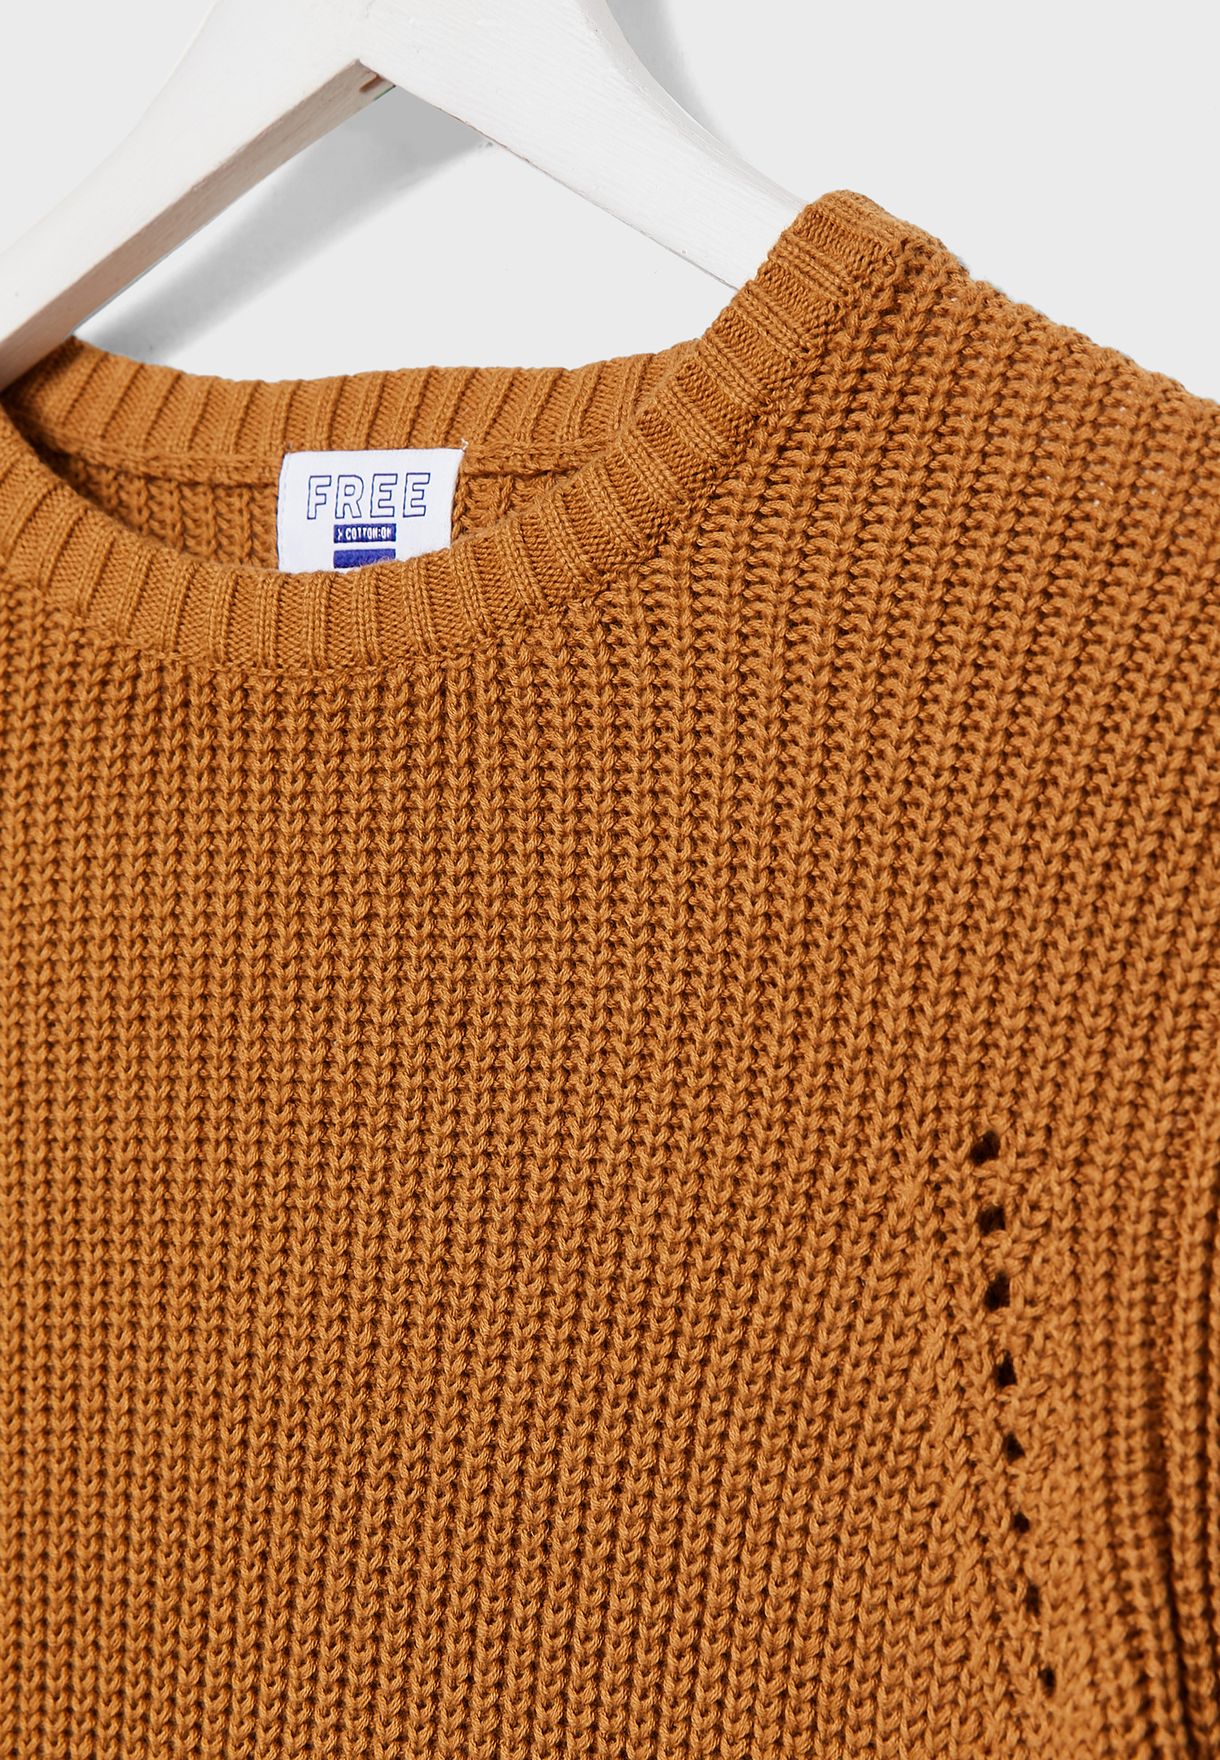 Youth Knitted Sweater